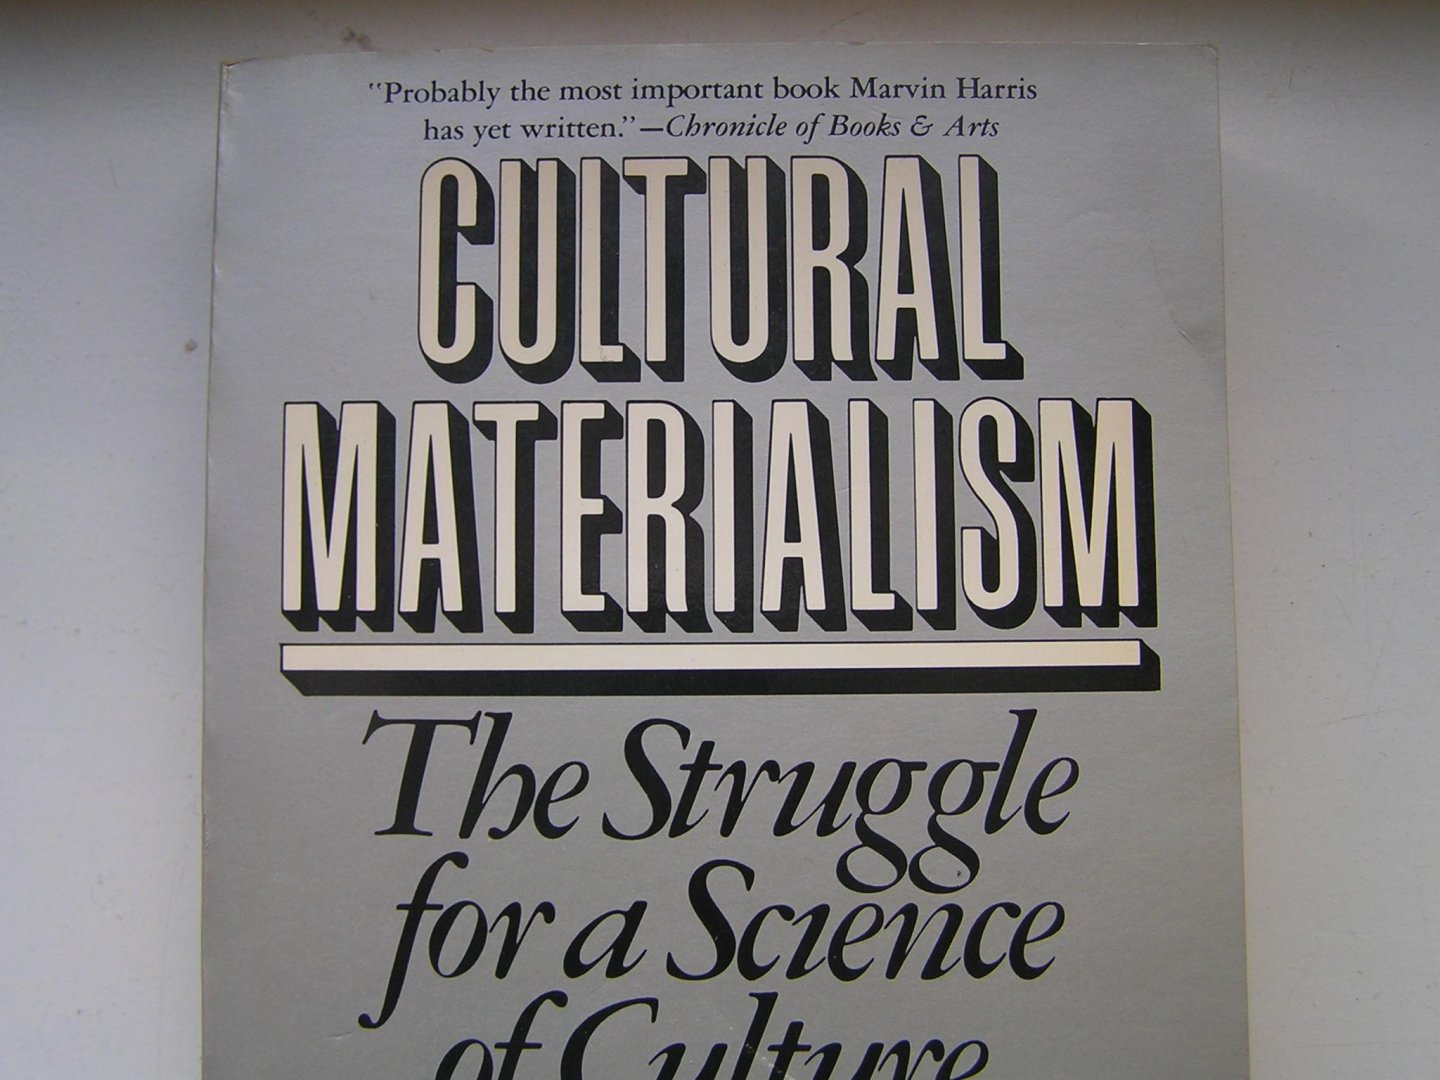 Harris, Marvin - Cultural Materialism. The struggle for a Science of Culture